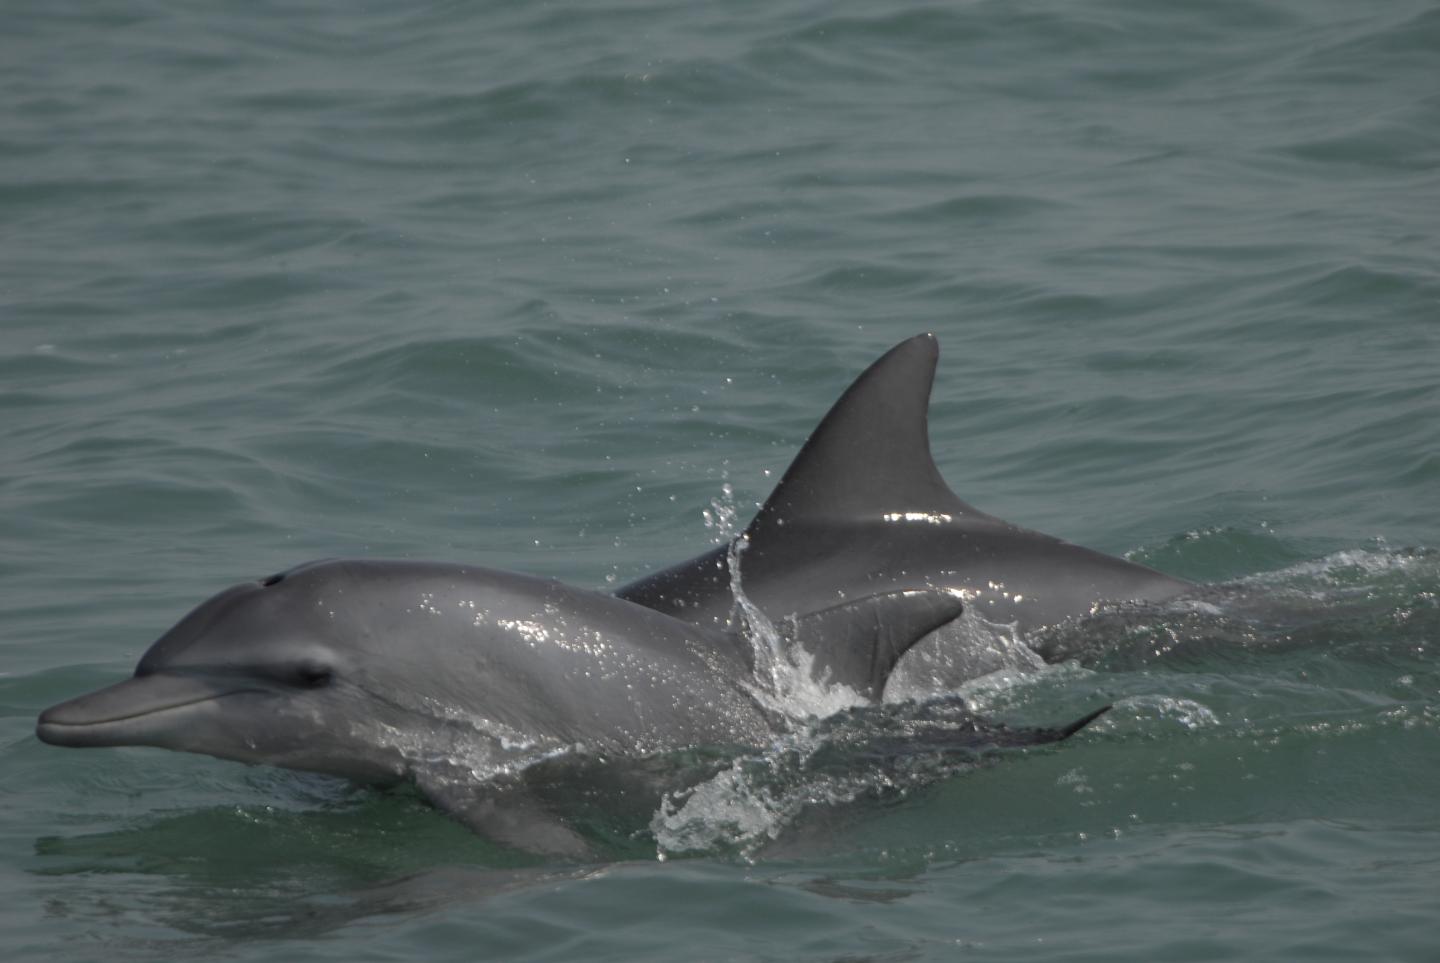 Scientists studying dolphins find Bay of Bengal a realm of